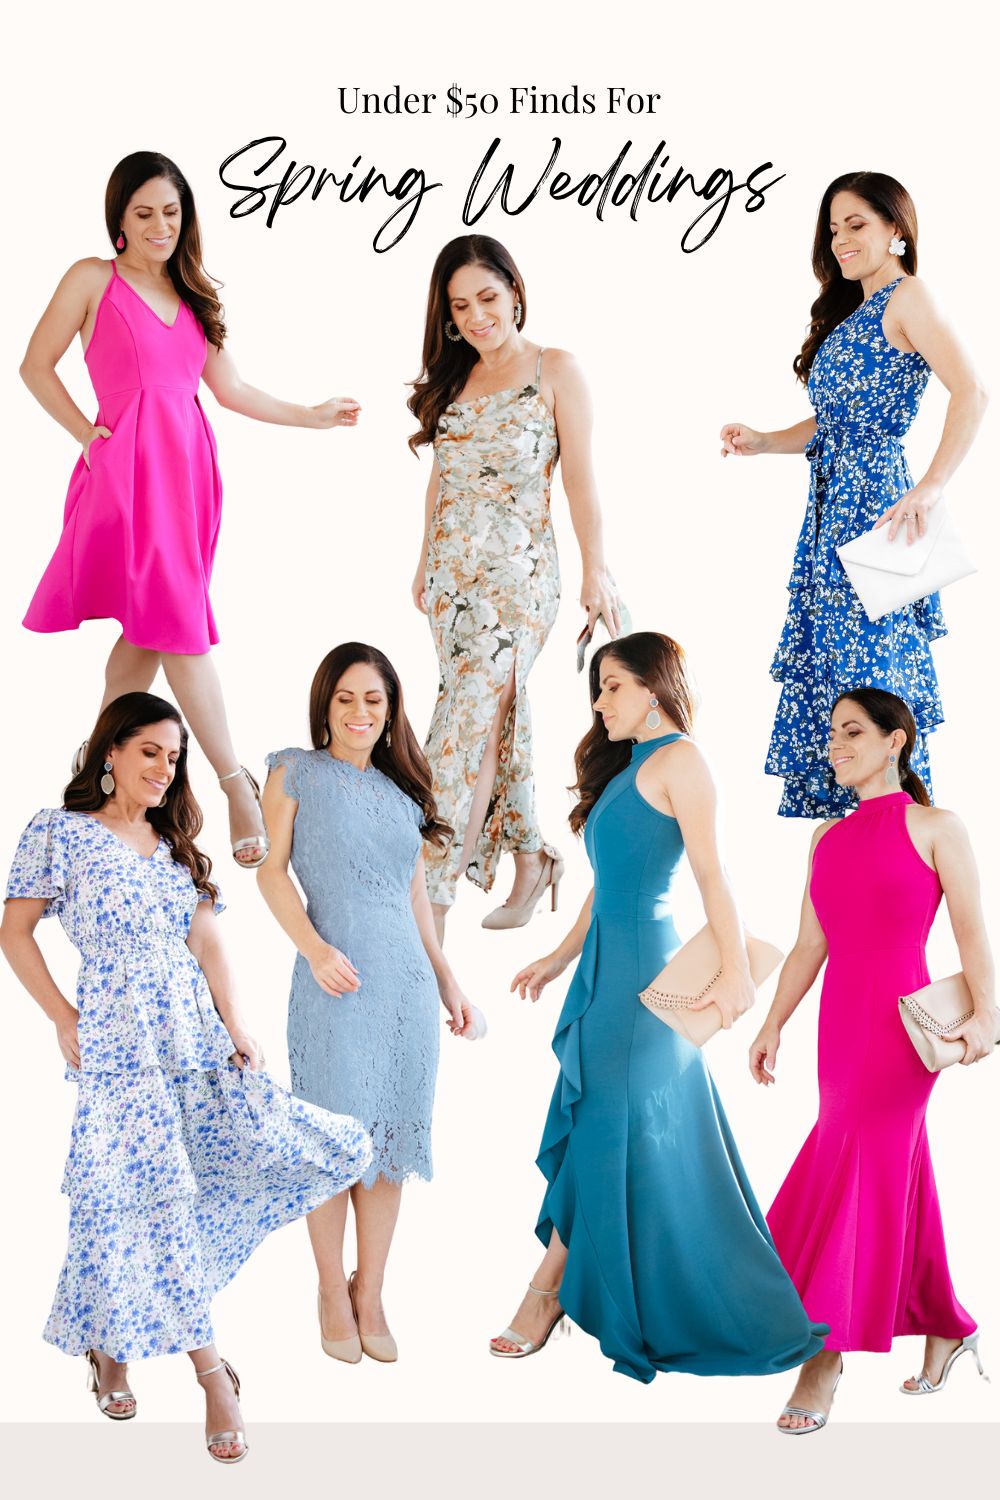 These 10 Spring Wedding Guest Dresses Are Under $50 at